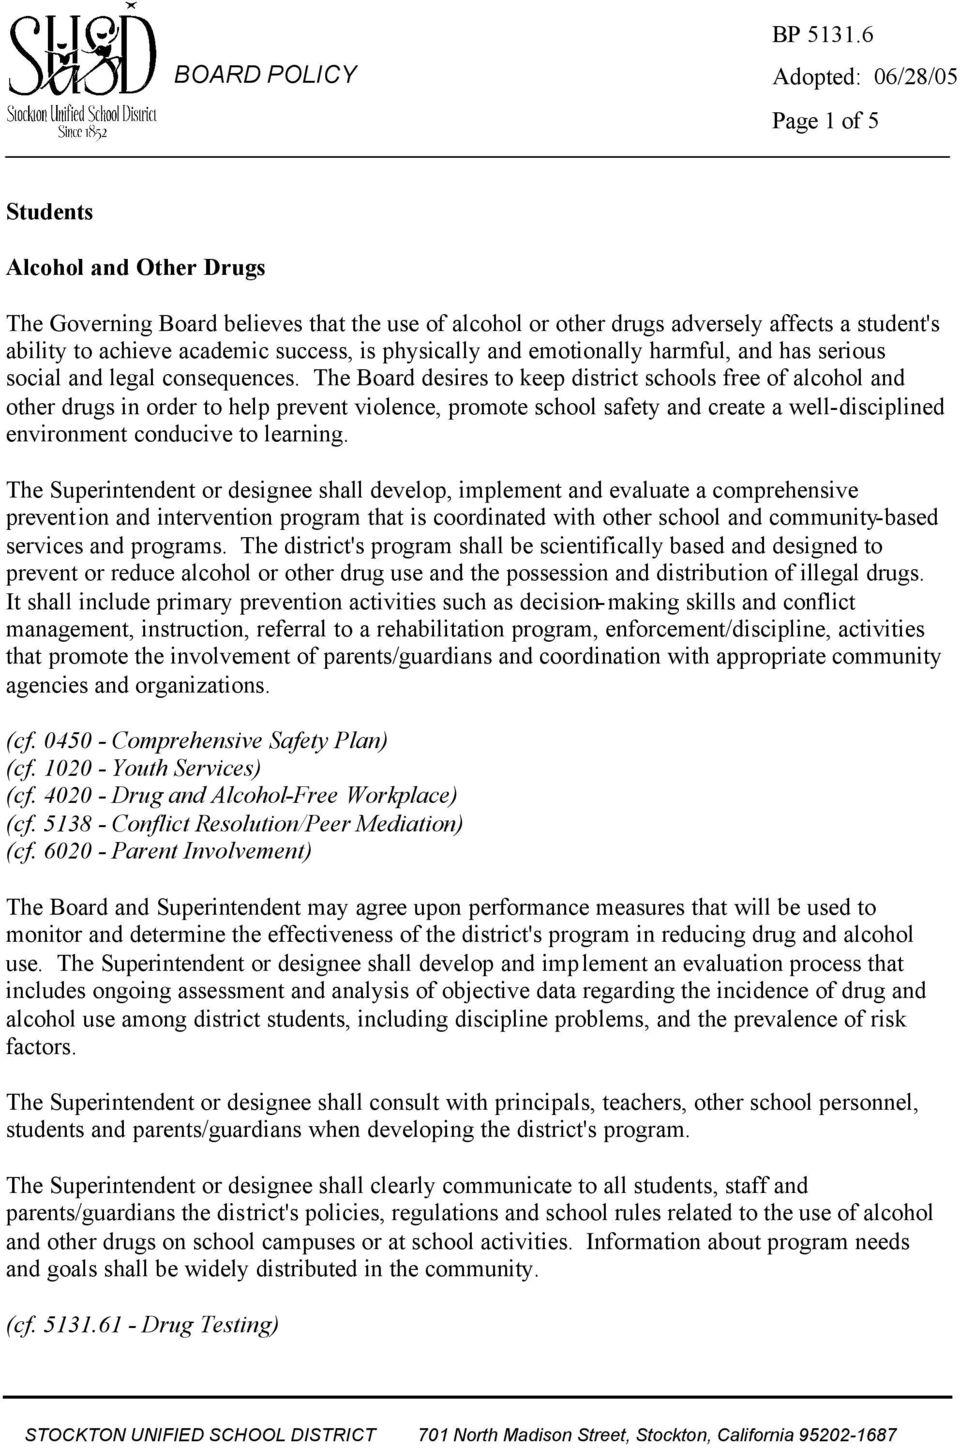 The Board desires to keep district schools free of alcohol and other drugs in order to help prevent violence, promote school safety and create a well-disciplined environment conducive to learning.